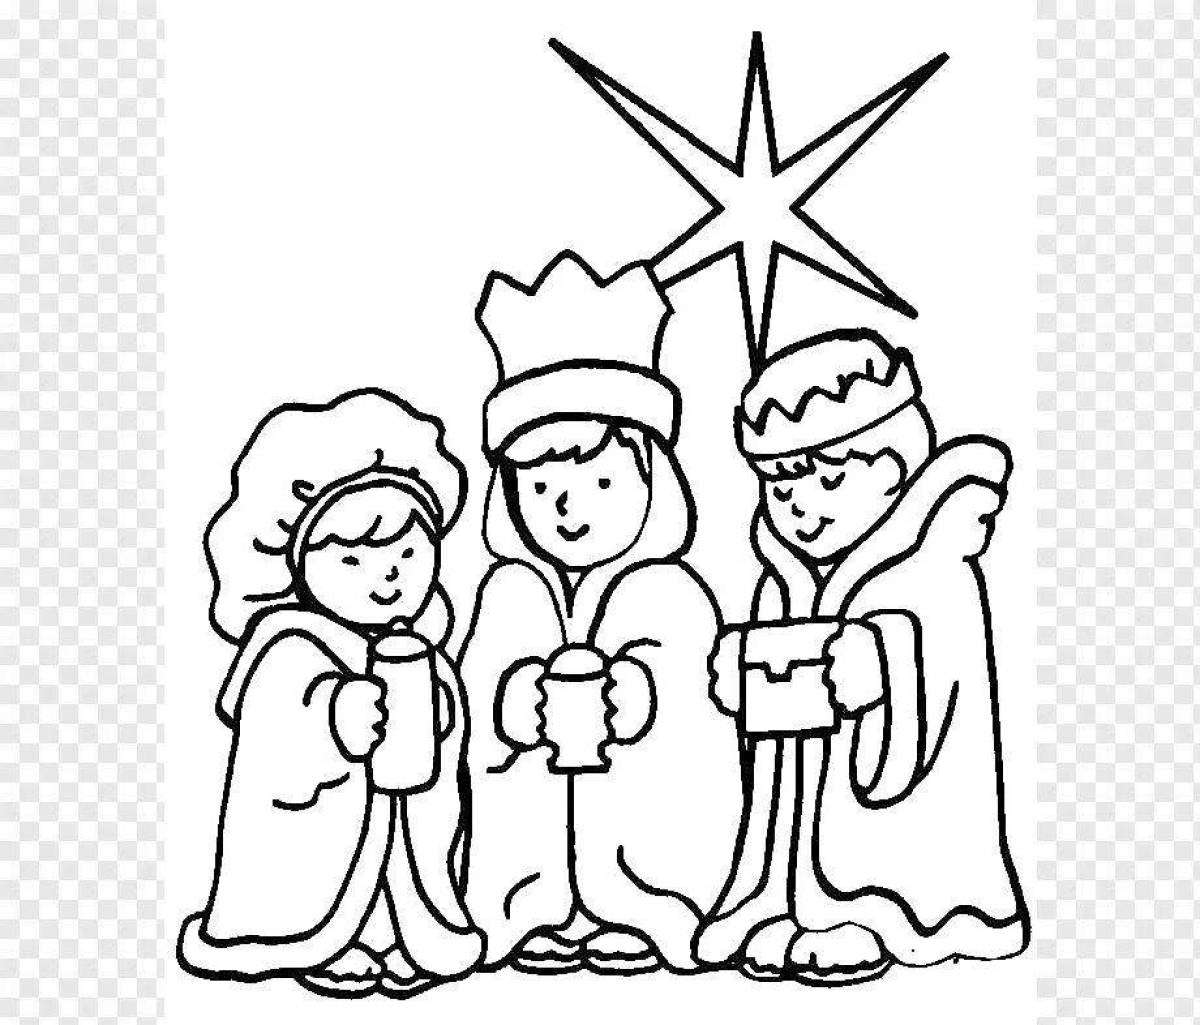 Exciting carol coloring page